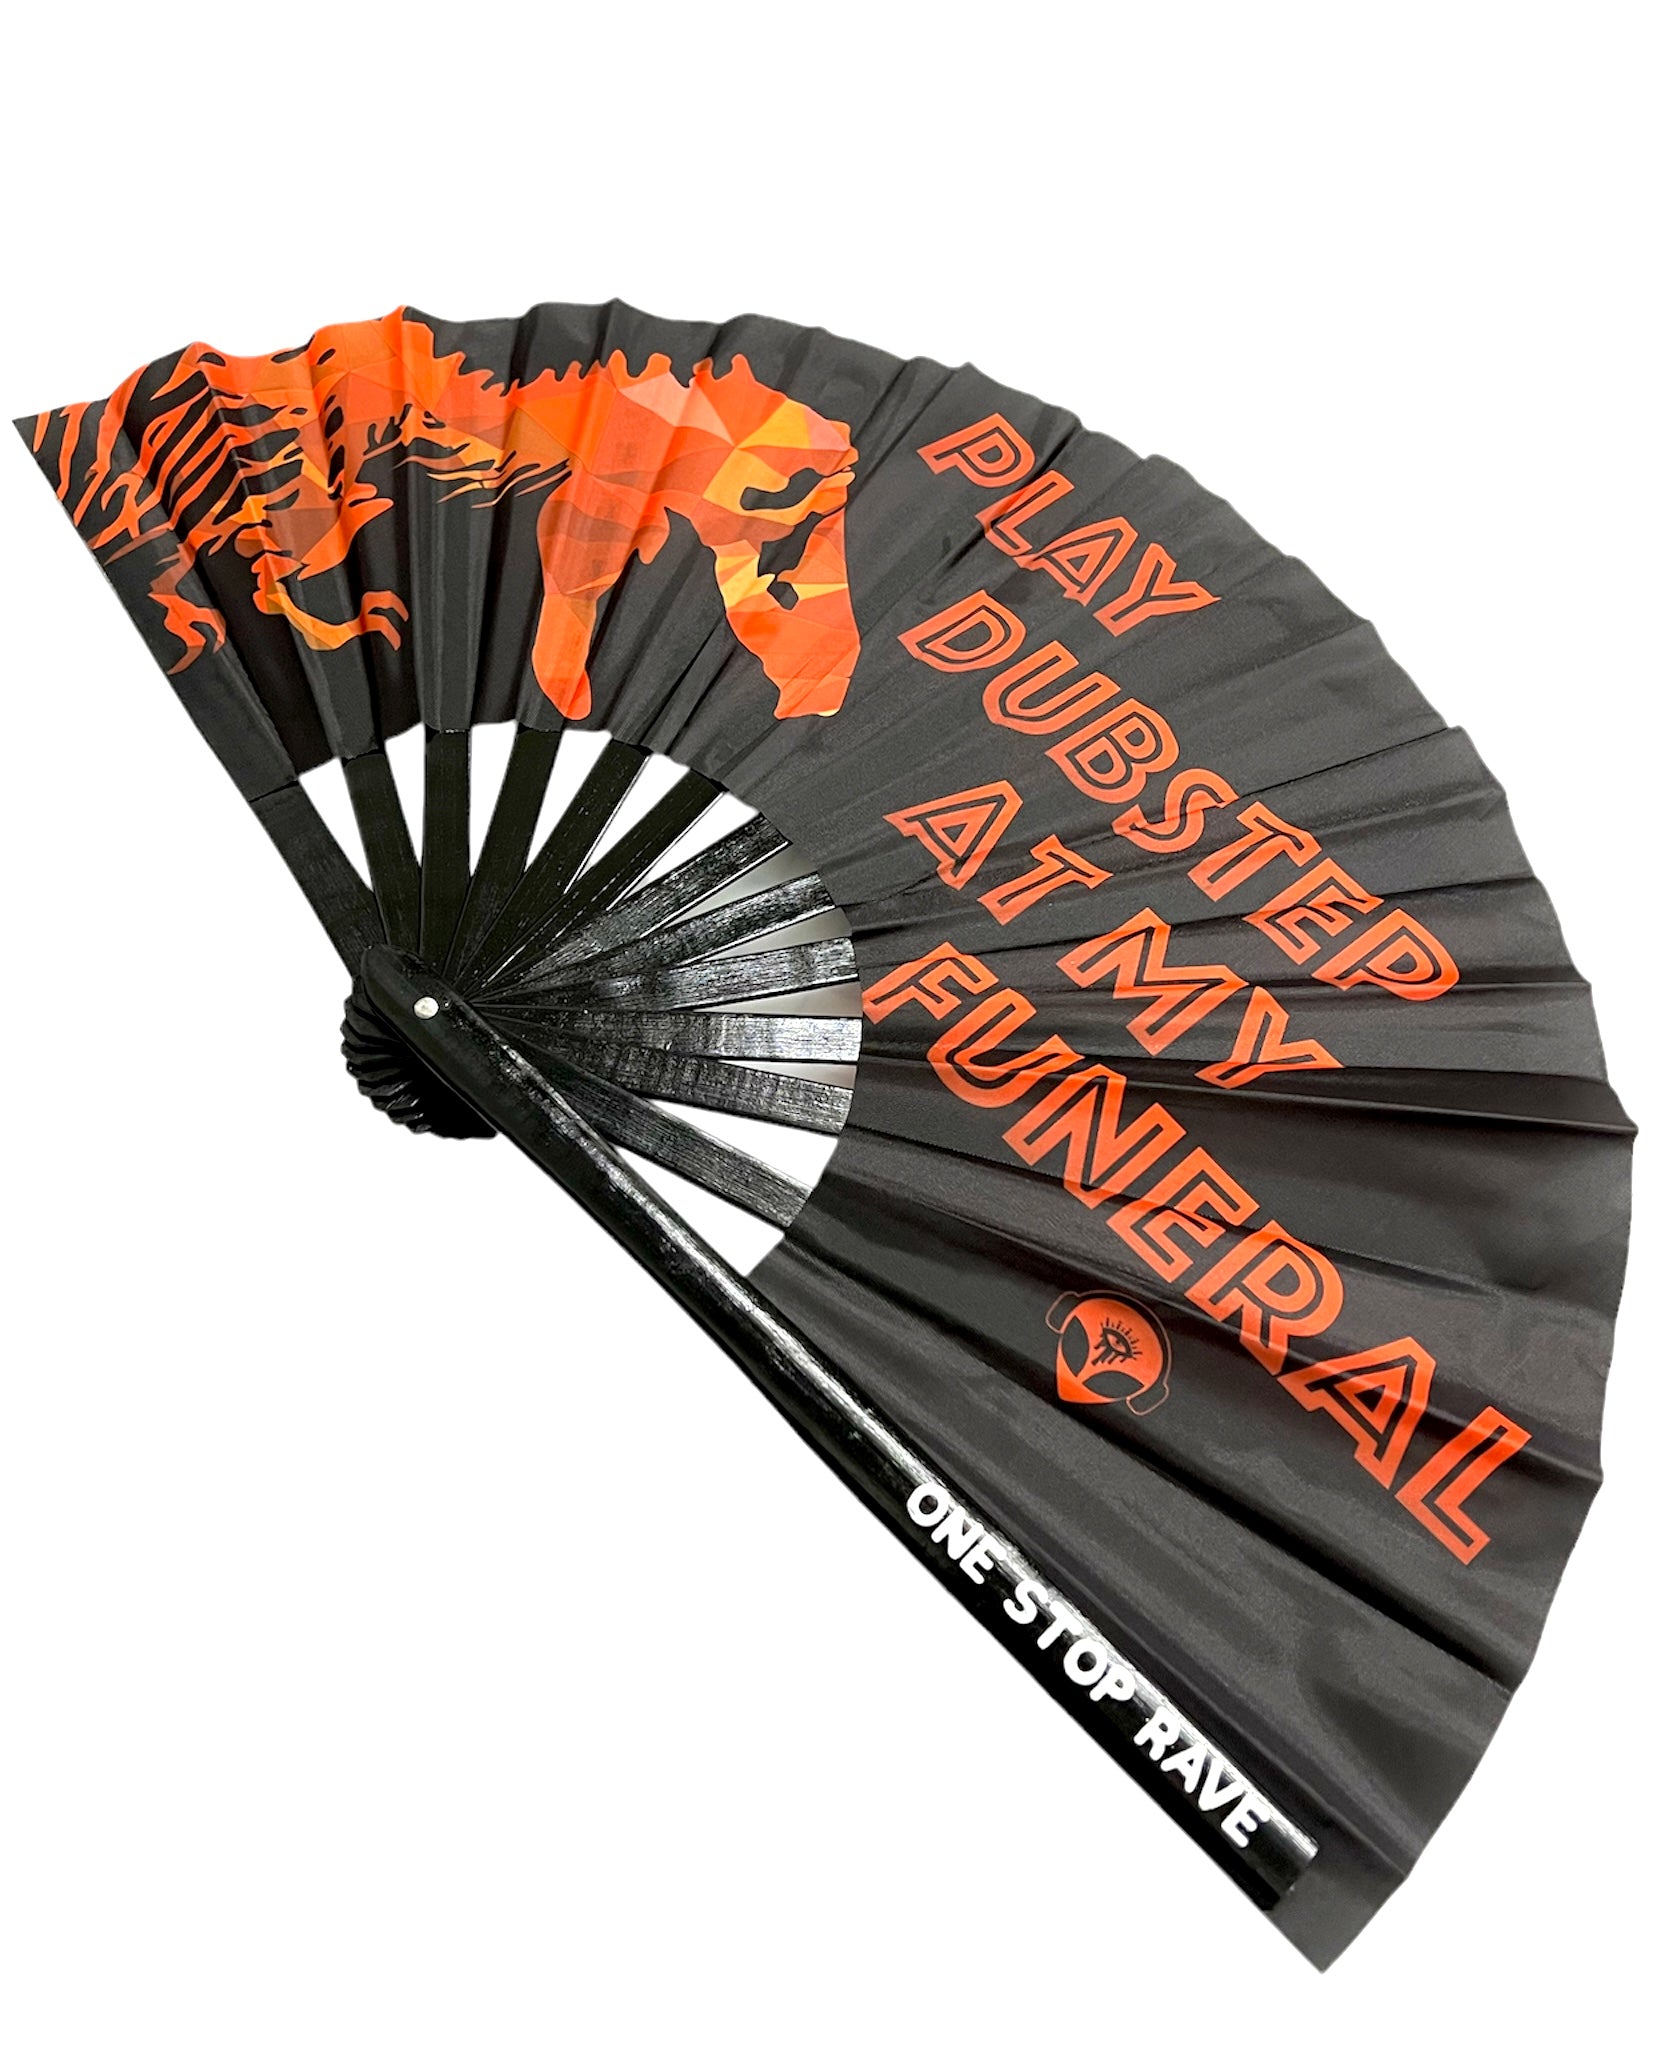 Play Dubstep At My Funeral Hand Fan, Festival Fans 13.5", - One Stop Rave